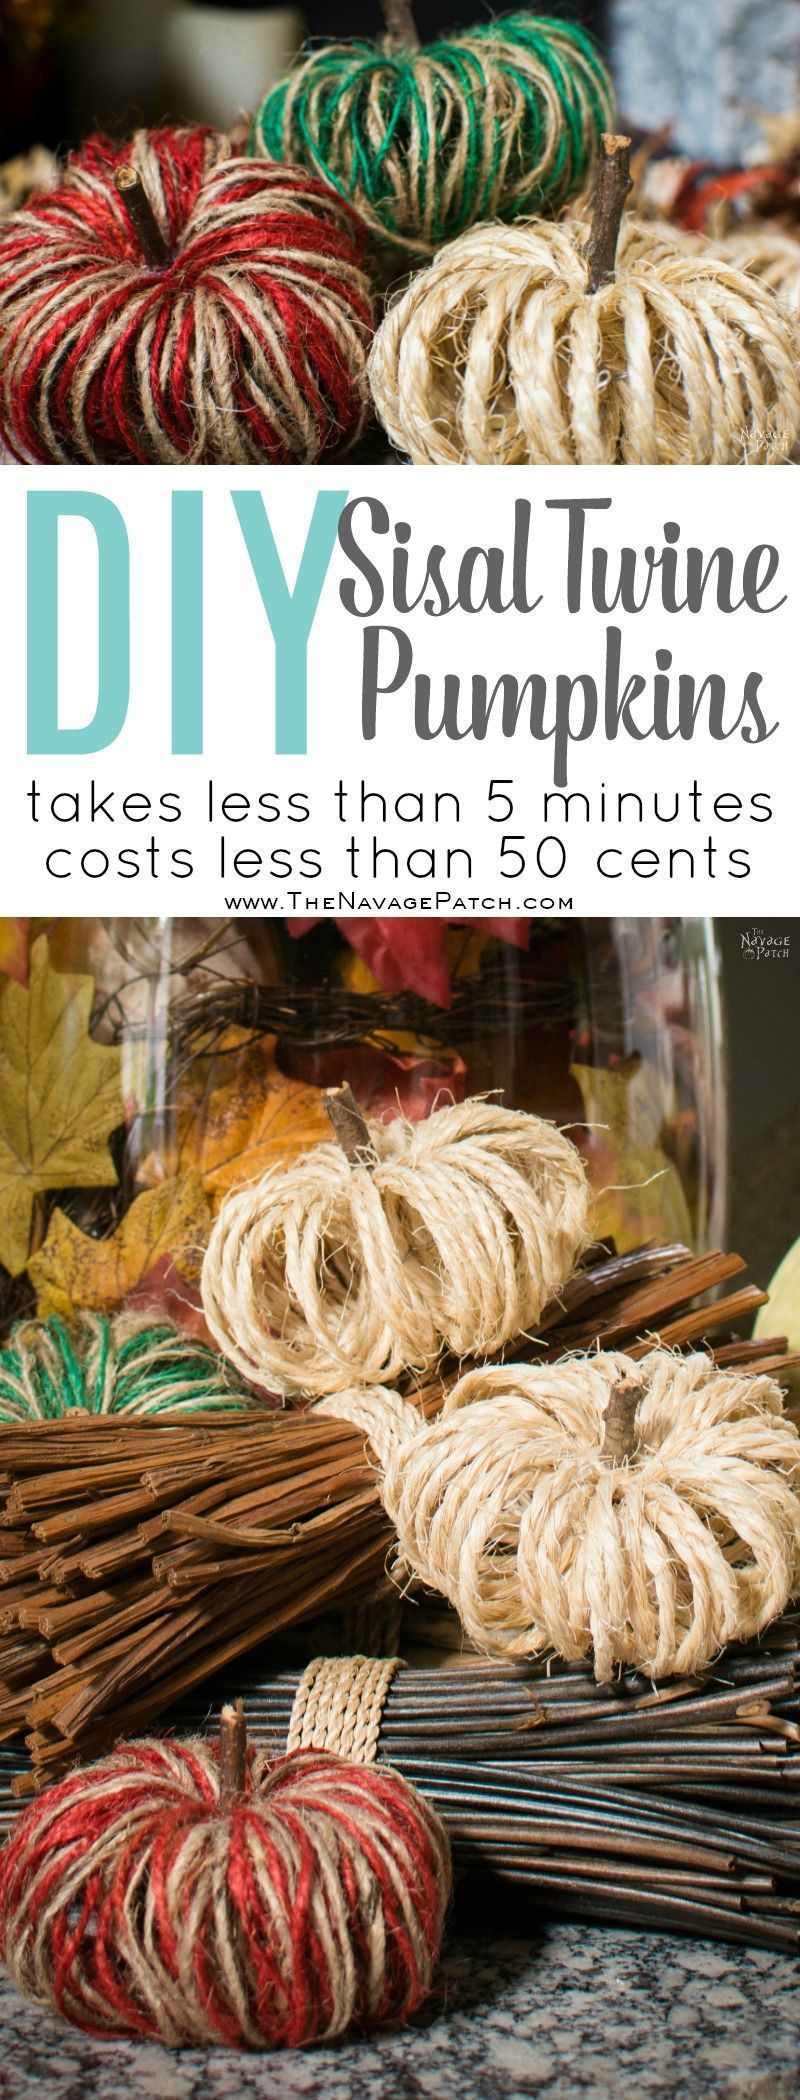 DIY Sisal Twine Pumpkins | How to make dual colored twine pumpkins | Easy and budget friendly DIY fall decoration | Dollar store